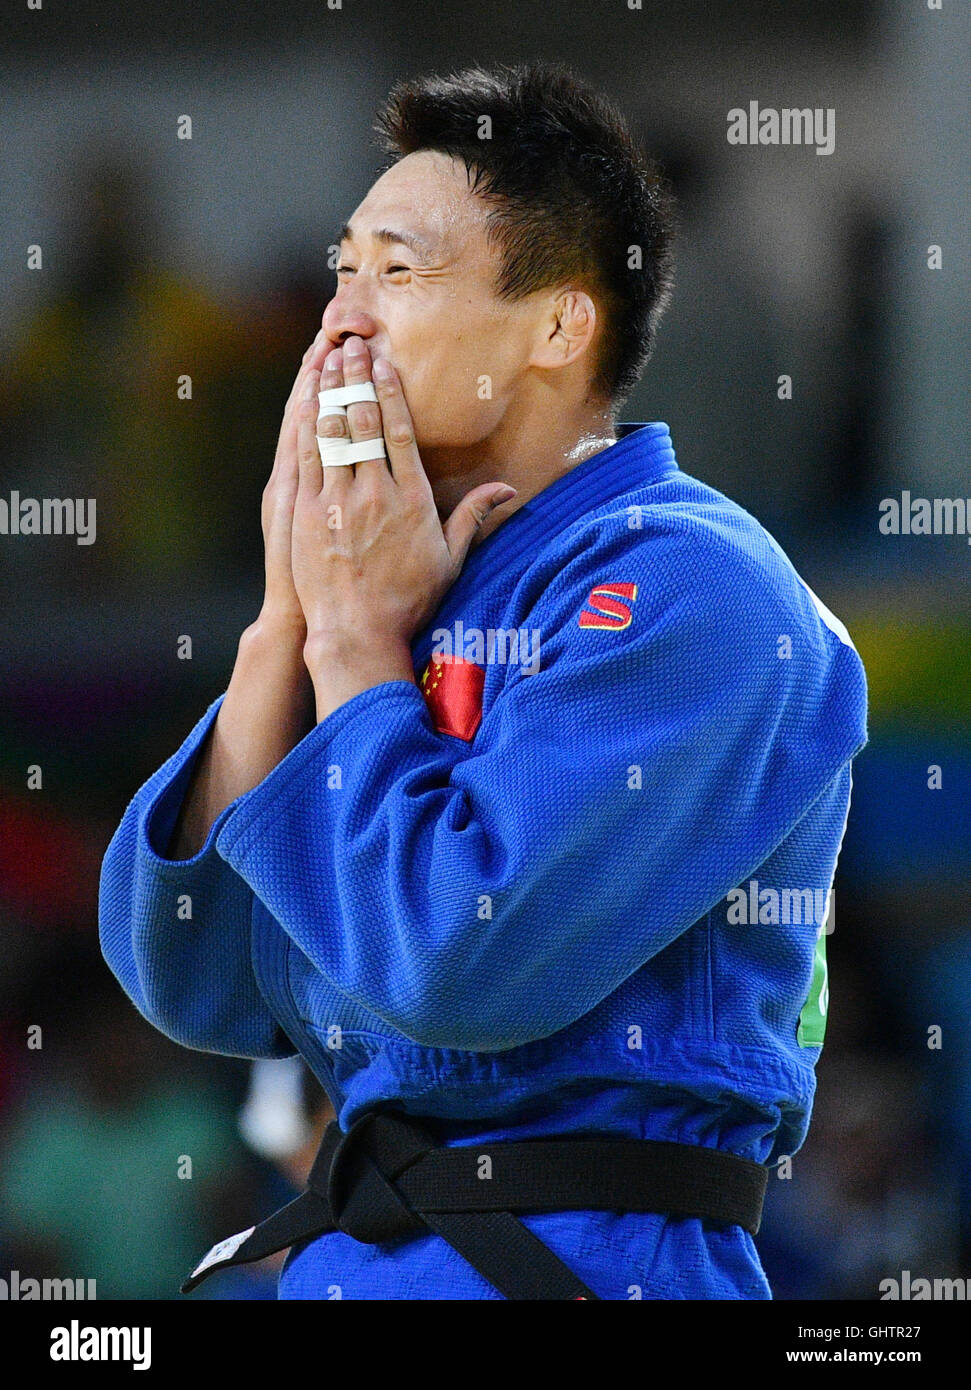 Rio de Janeiro, Brazil. 10th Aug, 2016. Xunzhao Cheng of China celebrates during his fight against O Lkhagvasuren of Mongolia during the Men -90 kg Bronze medal contest of the Judo event during the Olympic Games at Carioca Arena 2 in Rio de Janeiro, Brazil, 10 August 2016. Cheng won the Bronze medal. Photo: Lukas Schulze/dpa/Alamy Live News Stock Photo